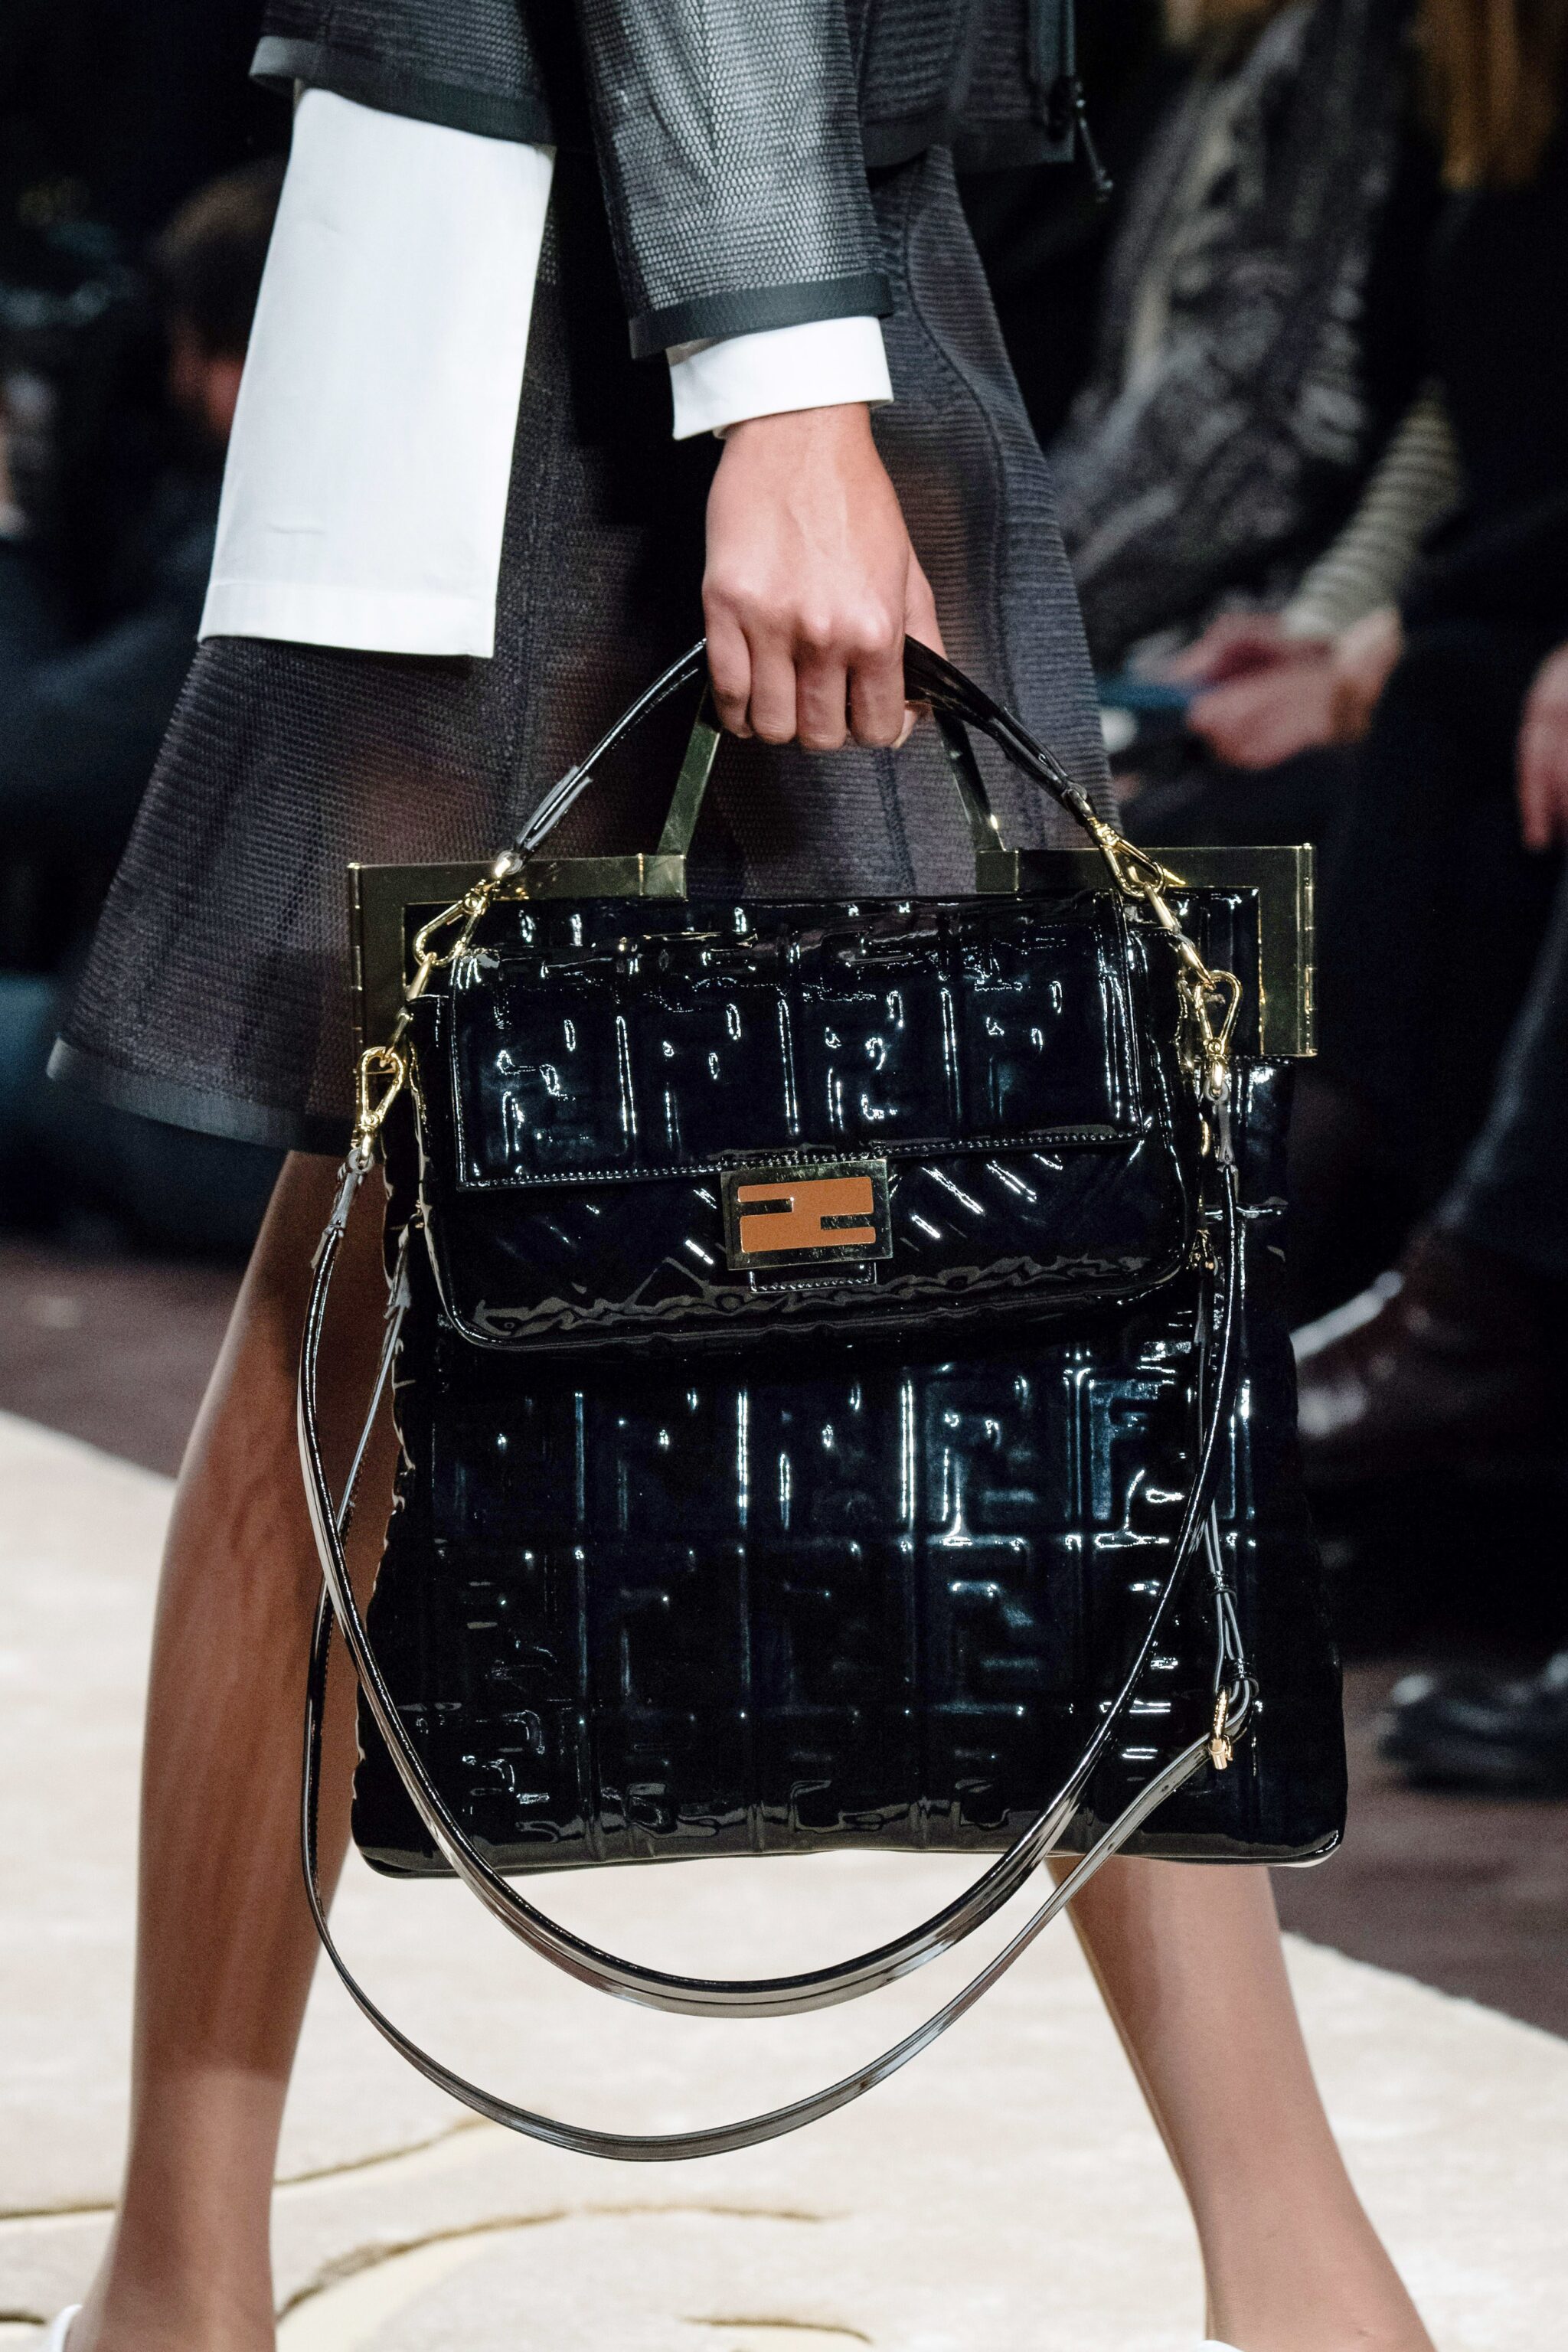 Fendi Fall/Winter 2019 Runway Bag Collection - Spotted